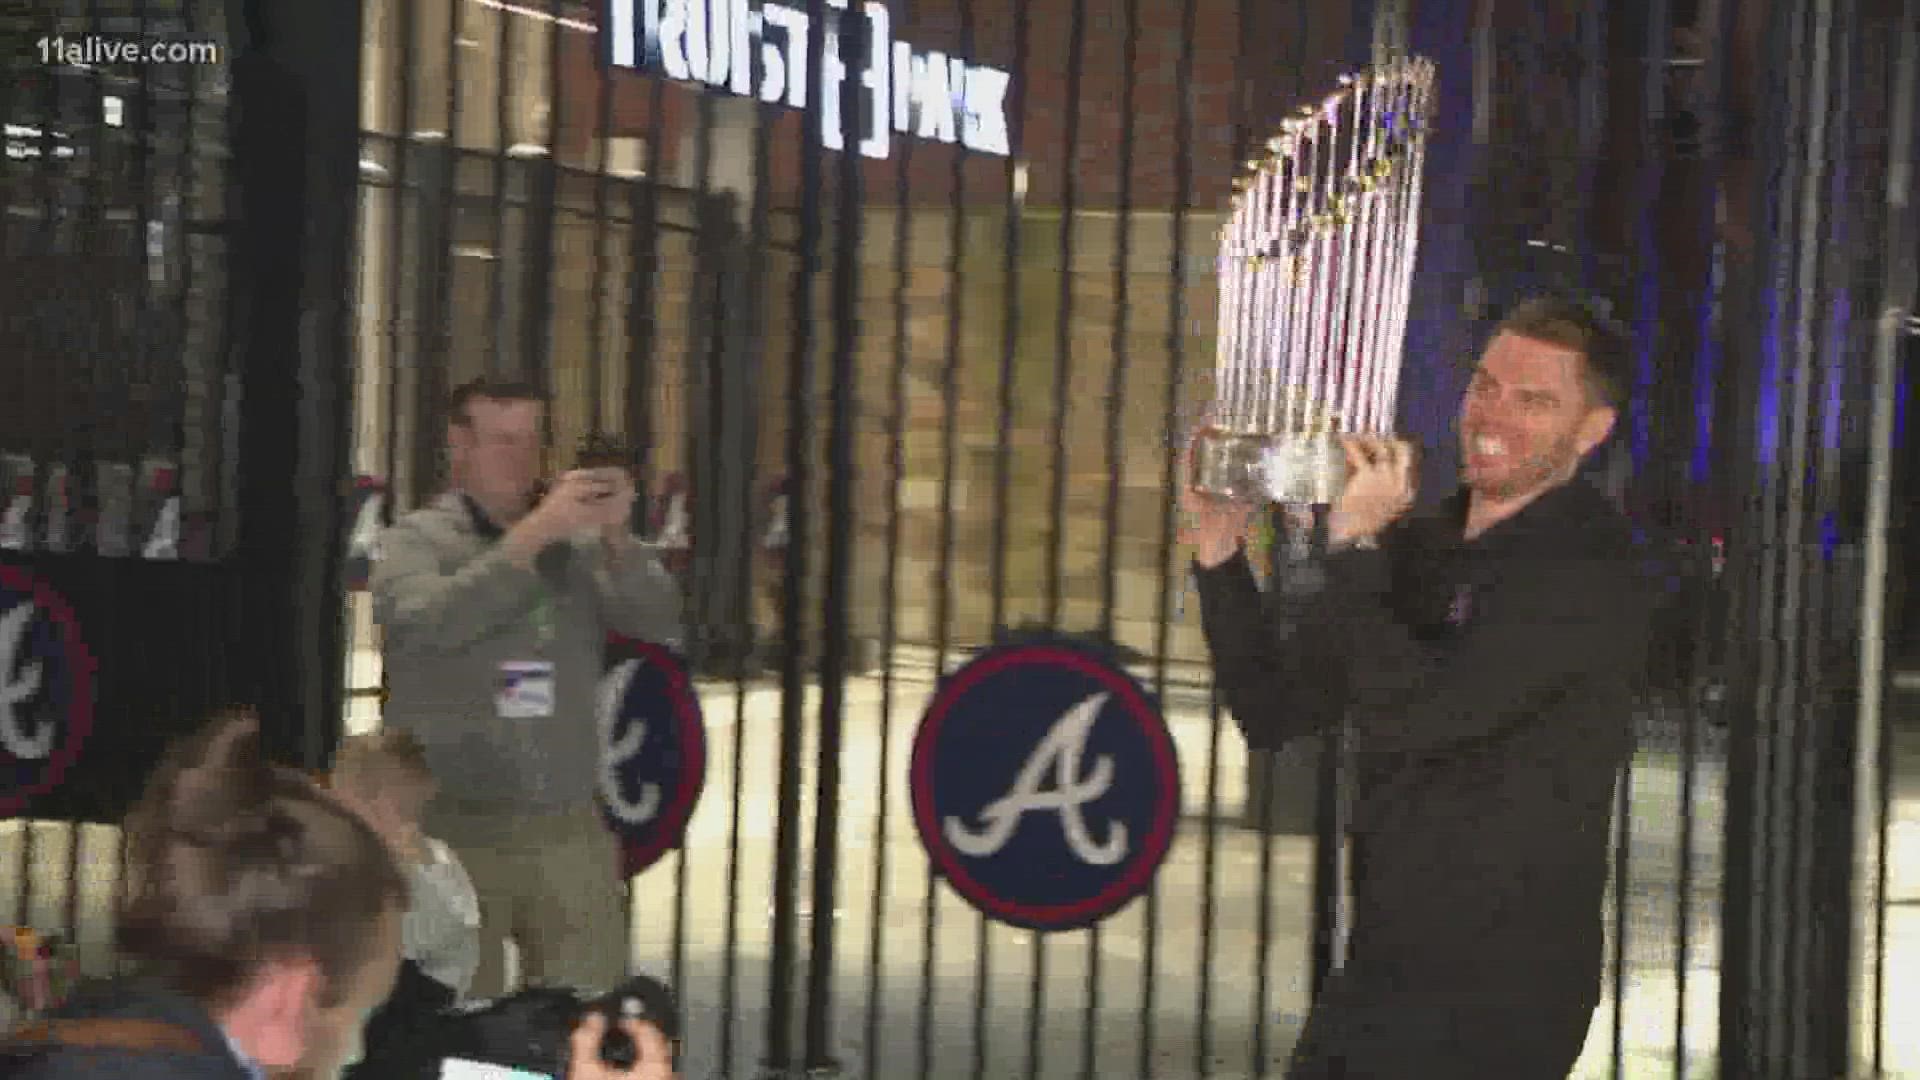 The Braves came back to Atlanta on Wednesday after winning the World Series against the Houston Astros.